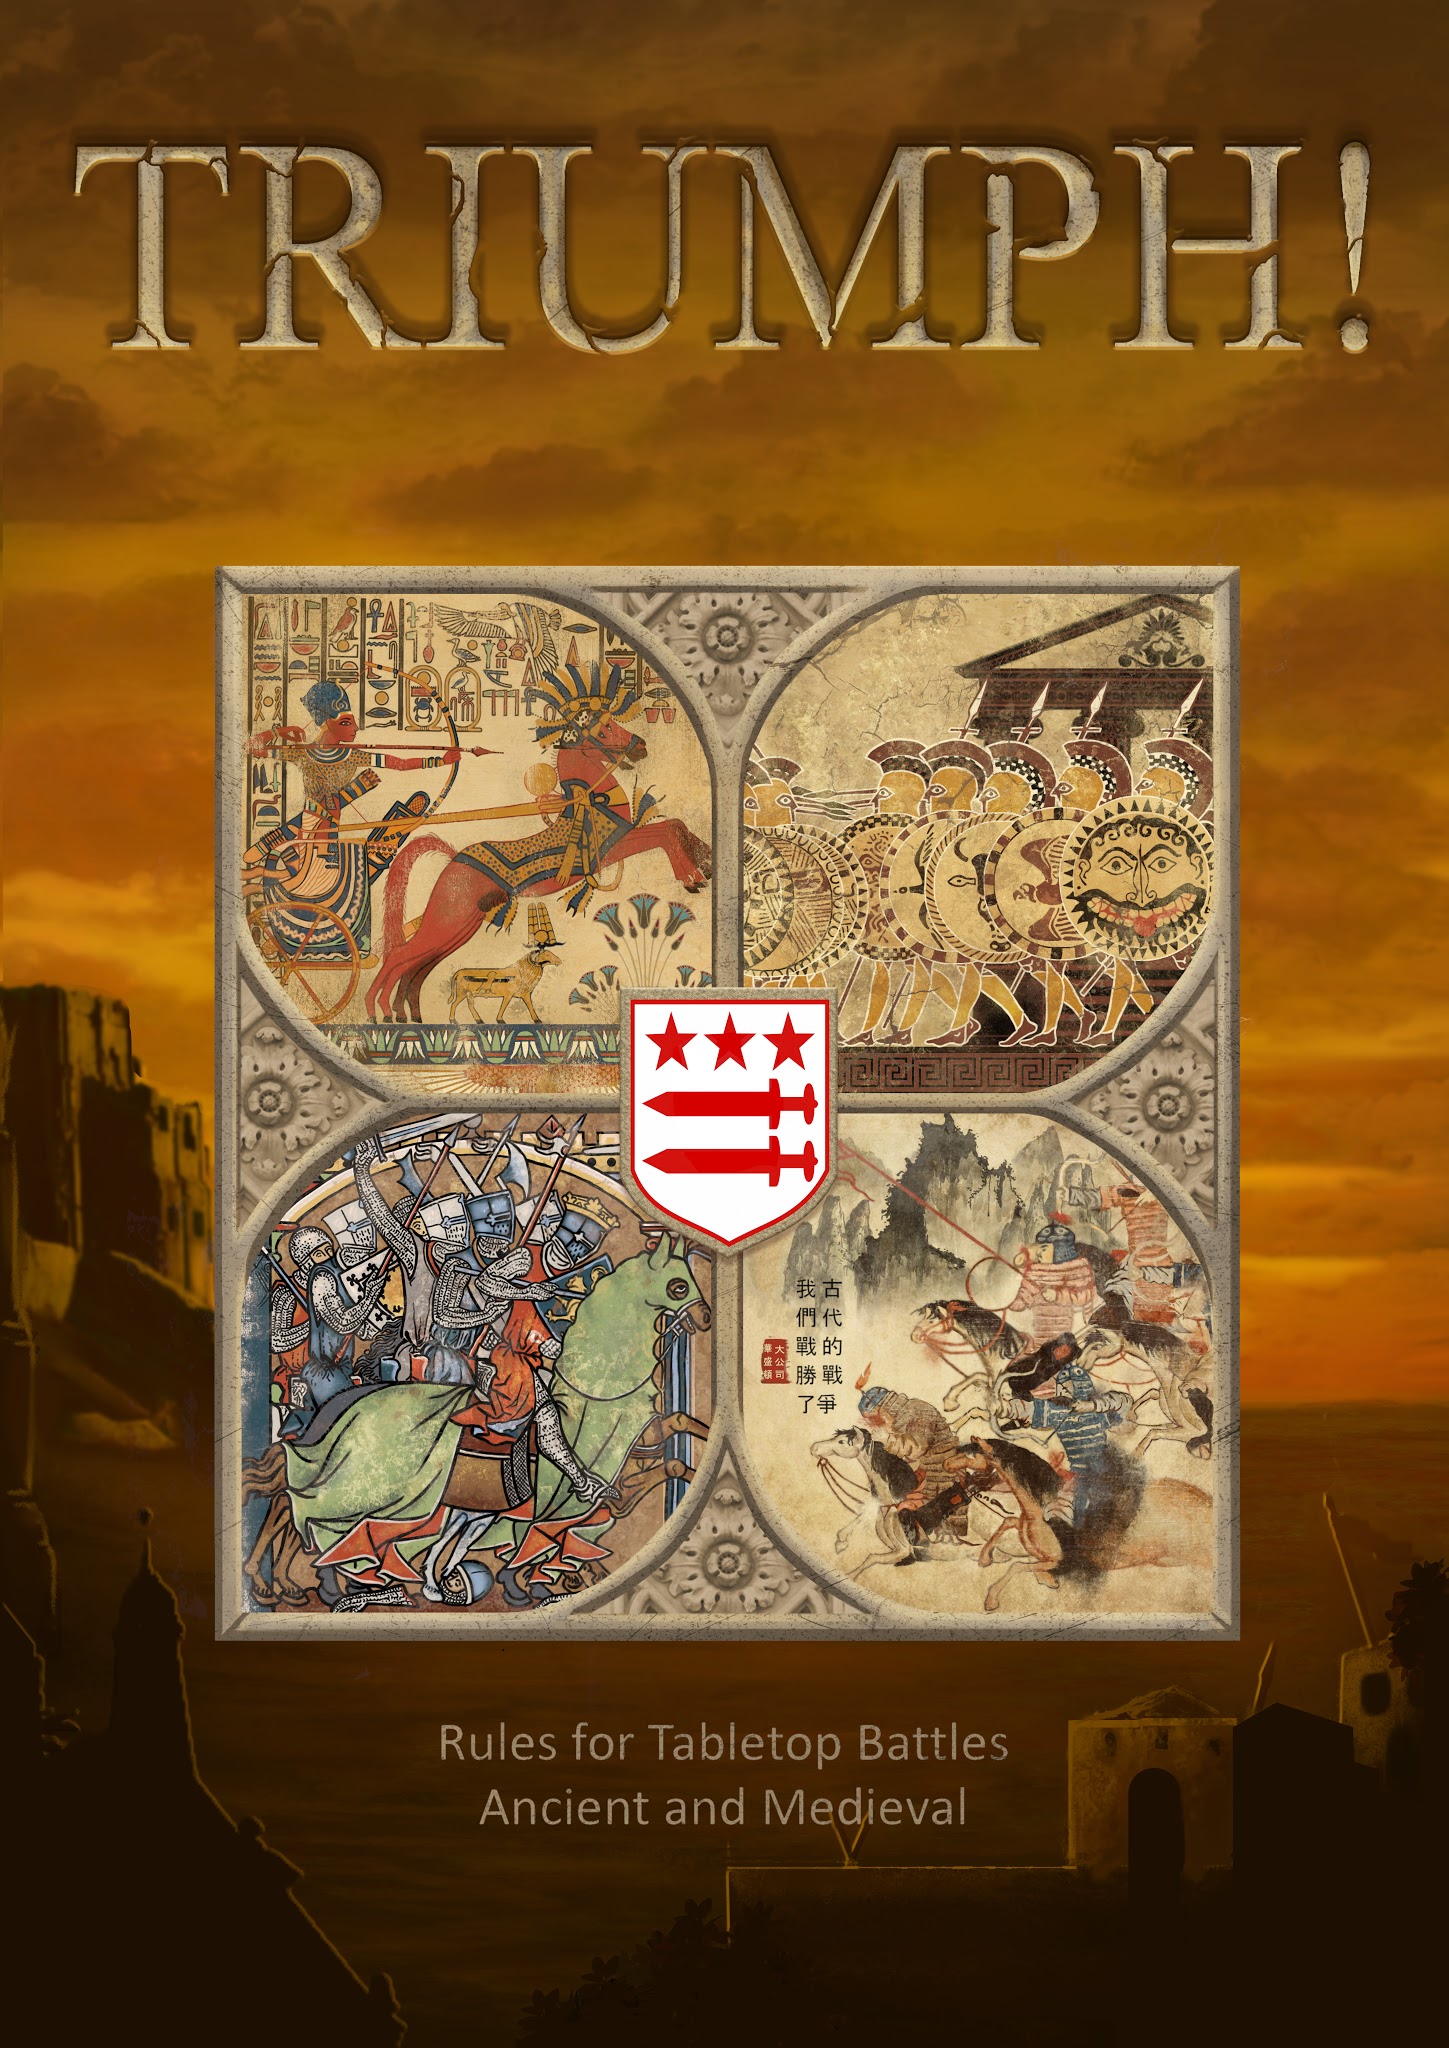 Cover for the Triumph miniature wargaming rules